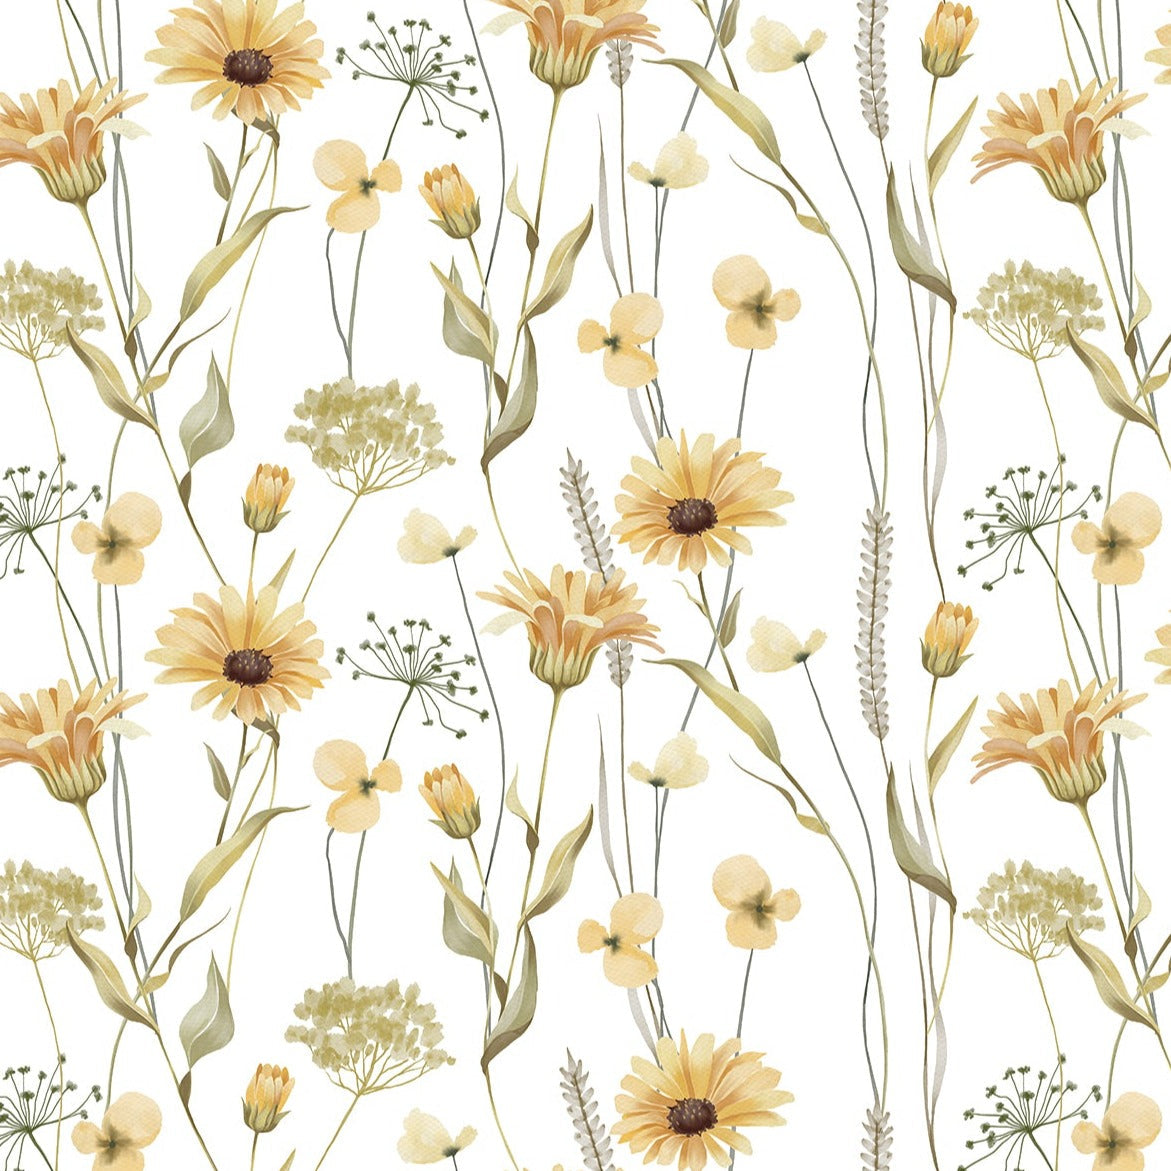 A close-up view of the Watercolour Sunflower Wallpaper, highlighting its artful depiction of sunflowers in bloom with watercolor textures that convey a sense of sun-drenched fields and the freshness of spring.